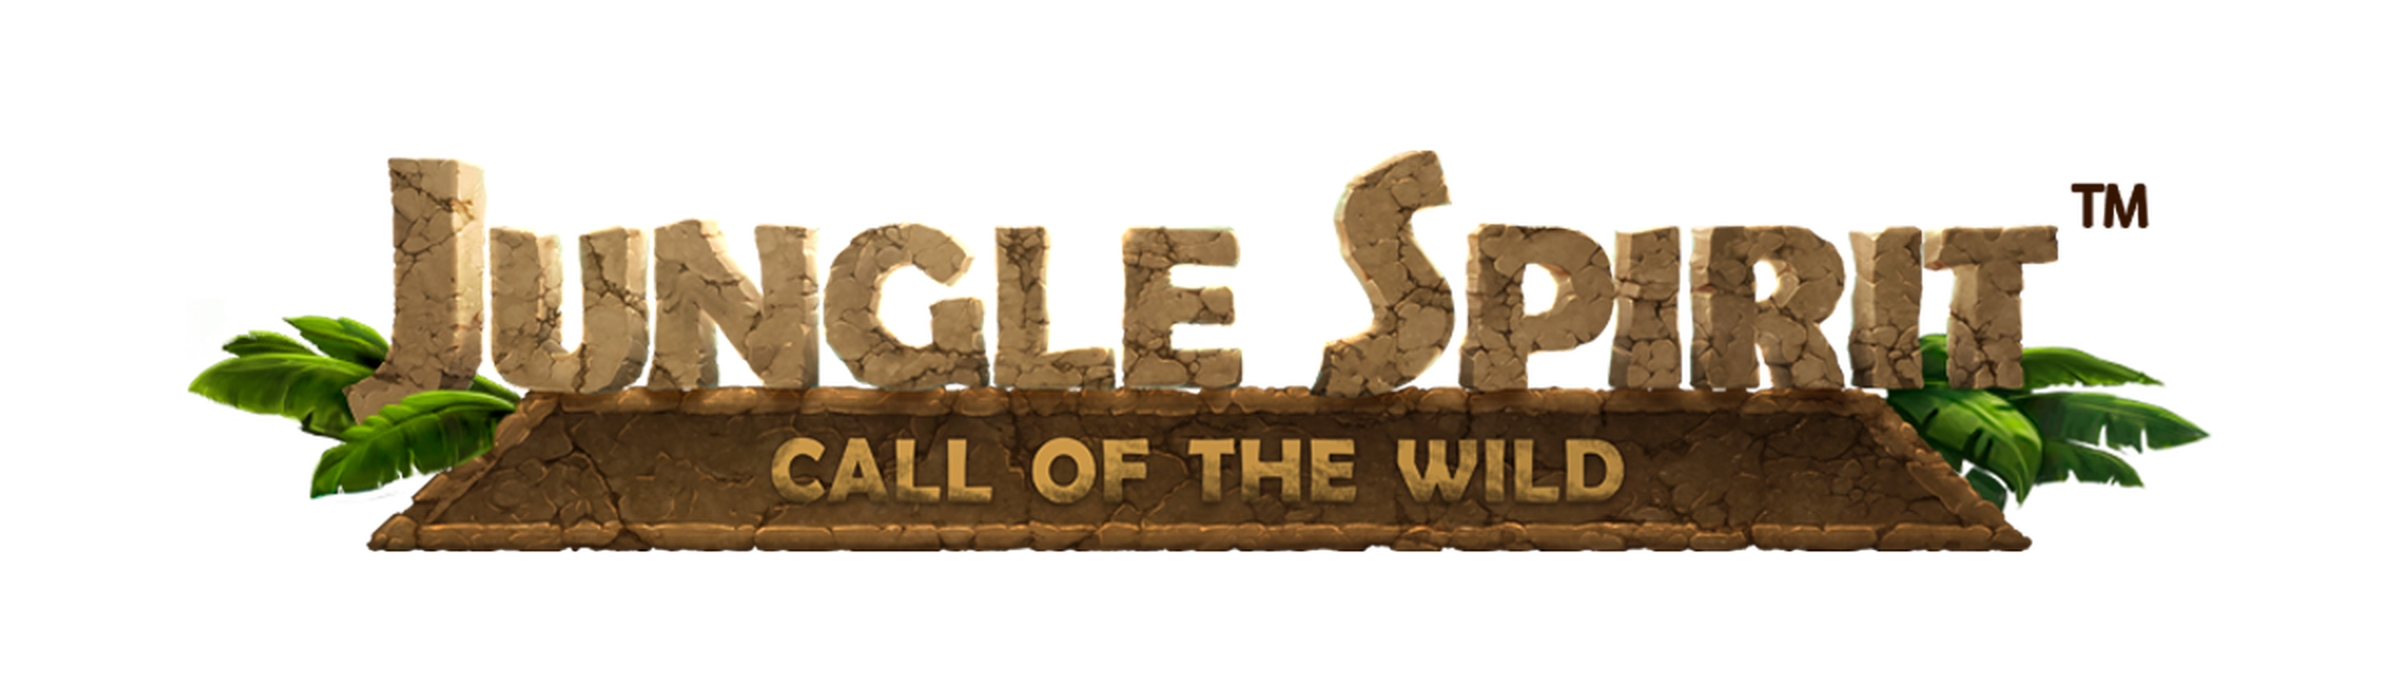 The Jungle Spirit: Call of the Wild Online Slot Demo Game by NetEnt